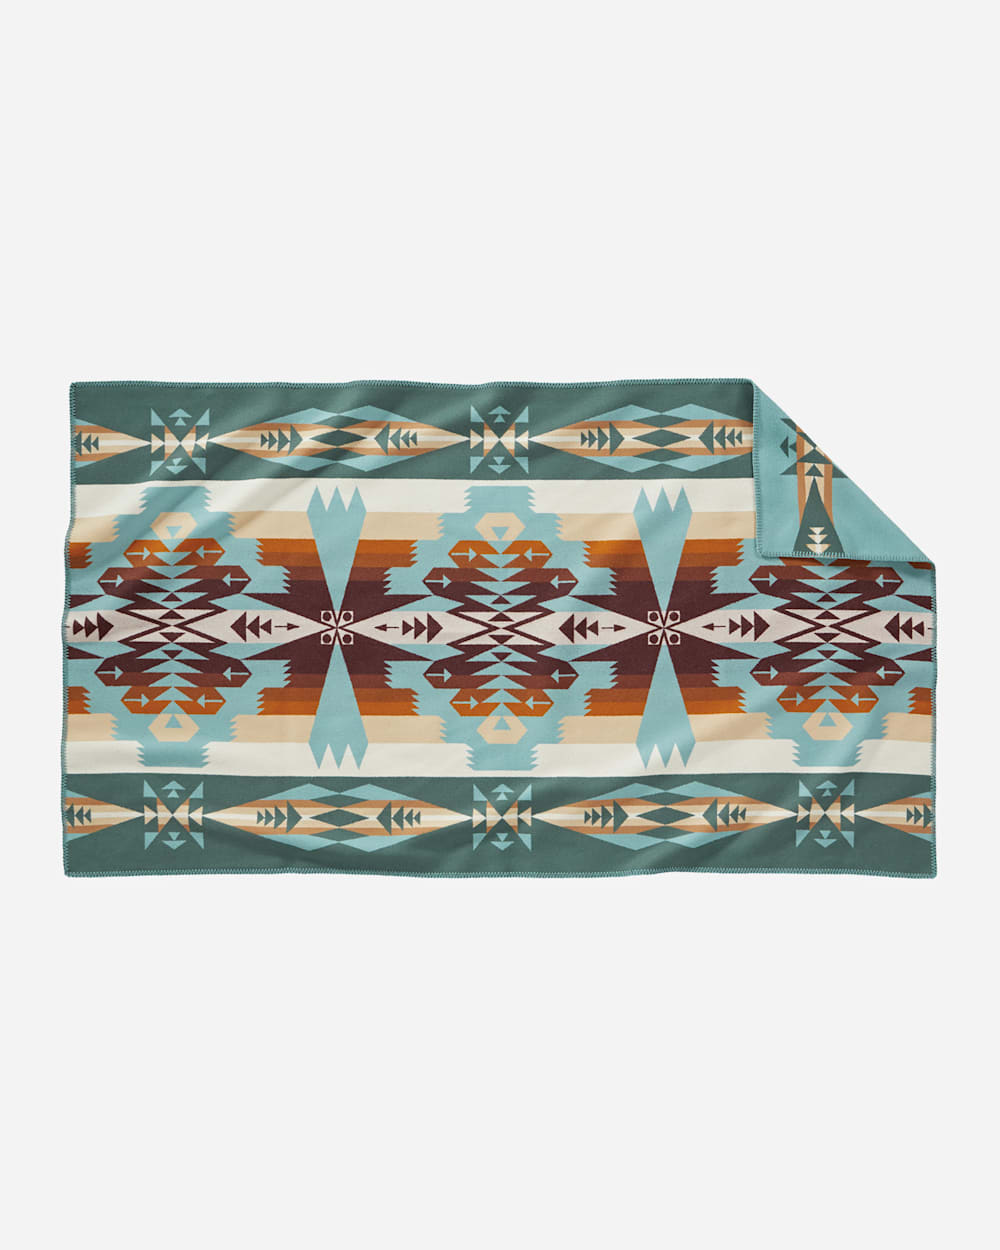 ADDITIONAL VIEW OF TUCSON SADDLE BLANKET IN AQUA image number 2